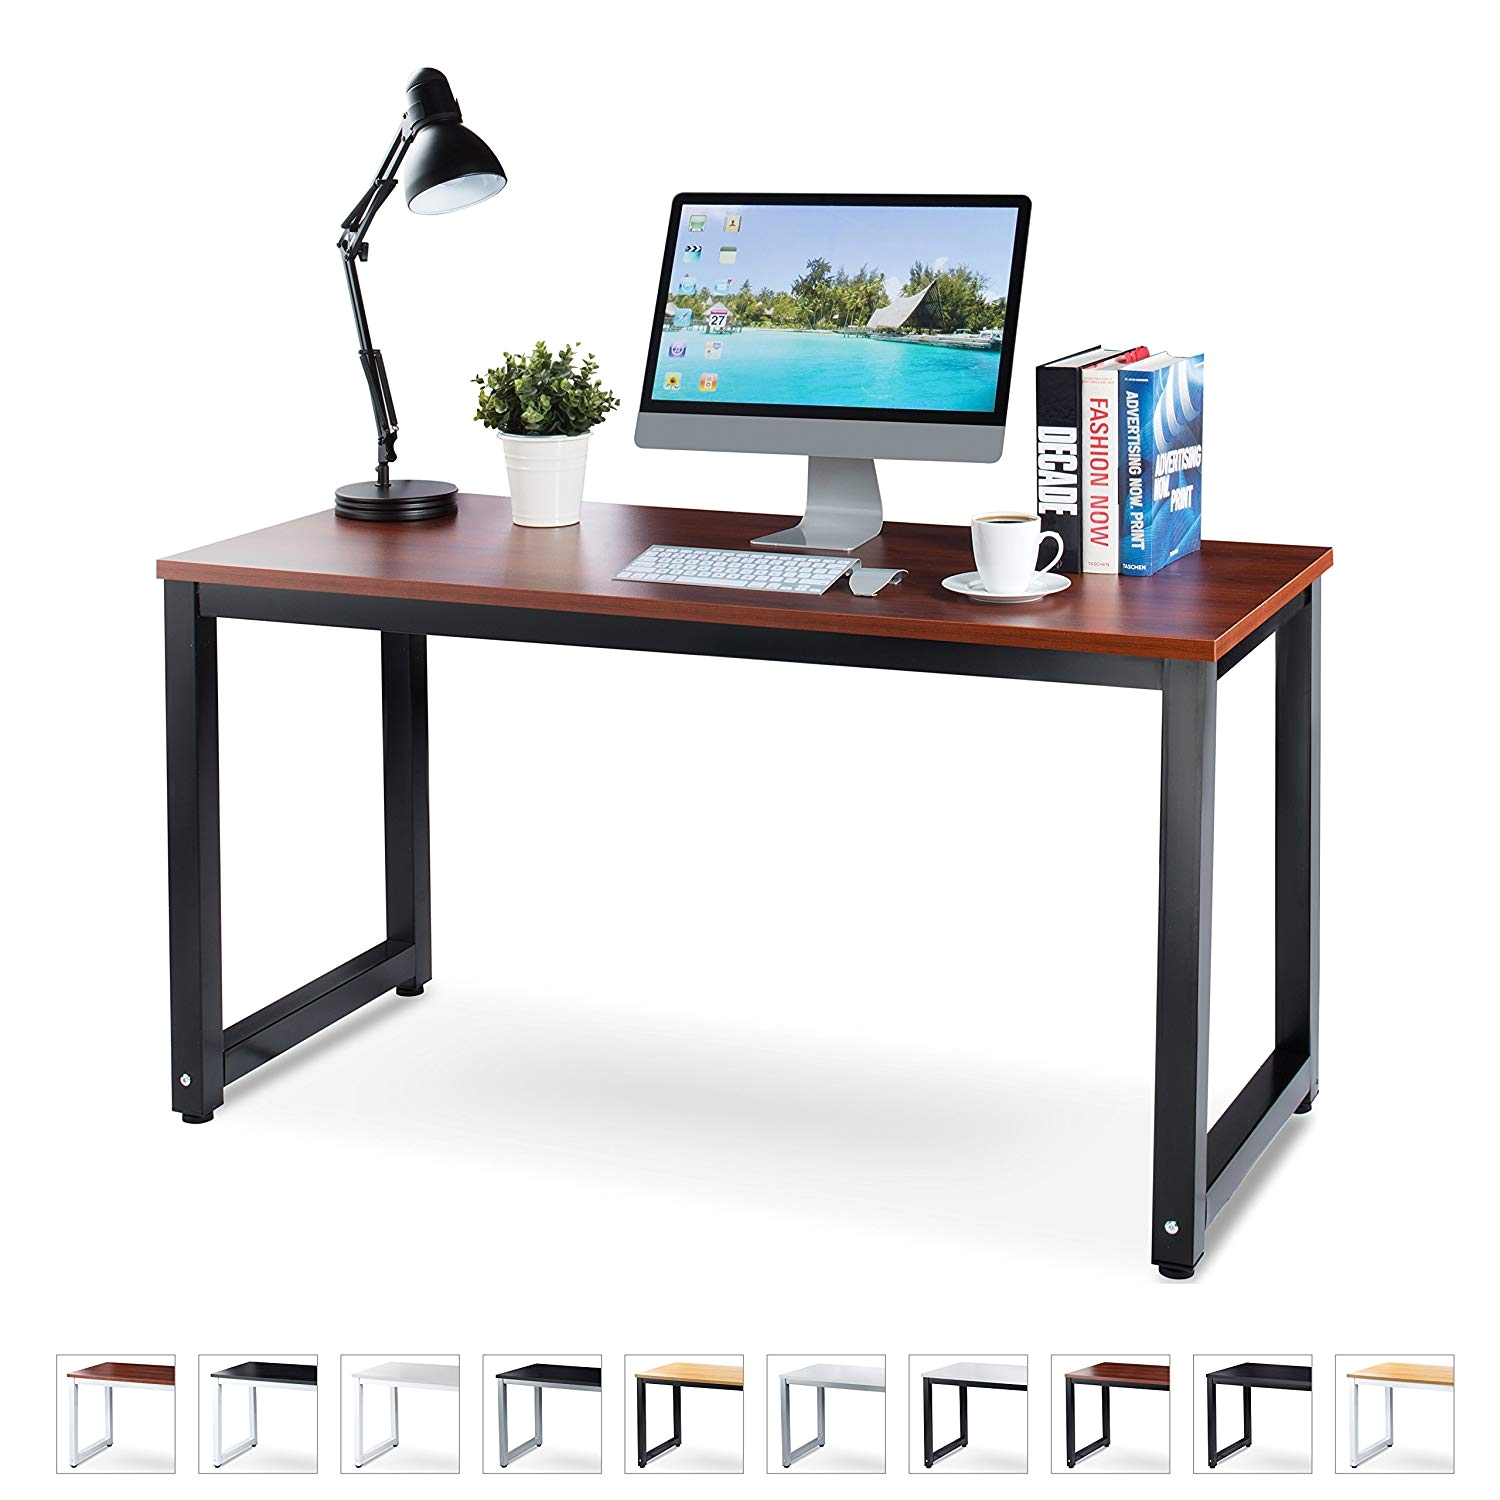 amazon com office computer desk 55 teak laminated wooden particleboard table and black powder coated steel frame easy assembly work or home tools